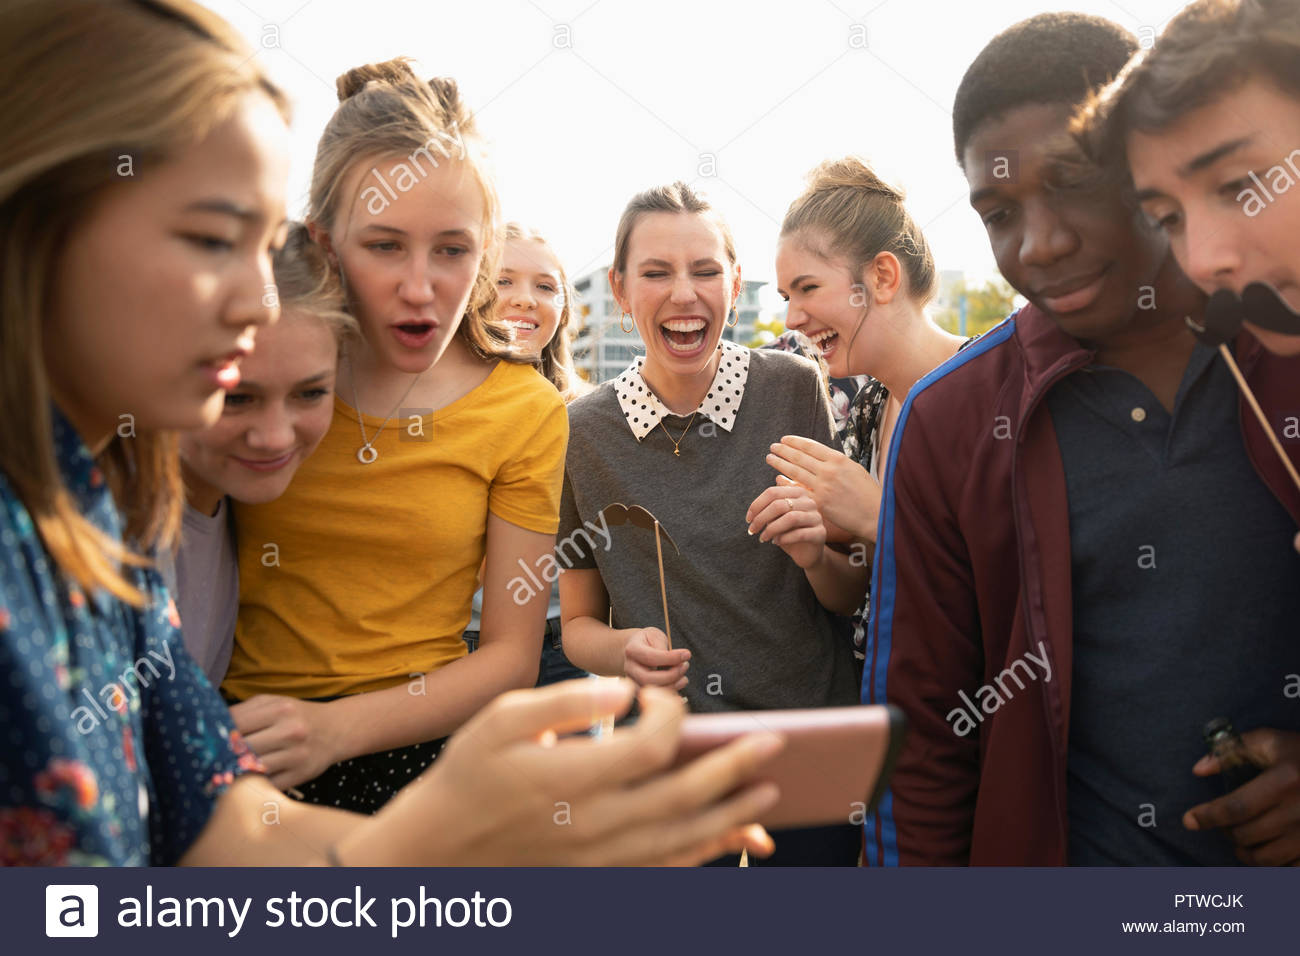 Playful teenagers with camera phone and mustache props Stock Photo